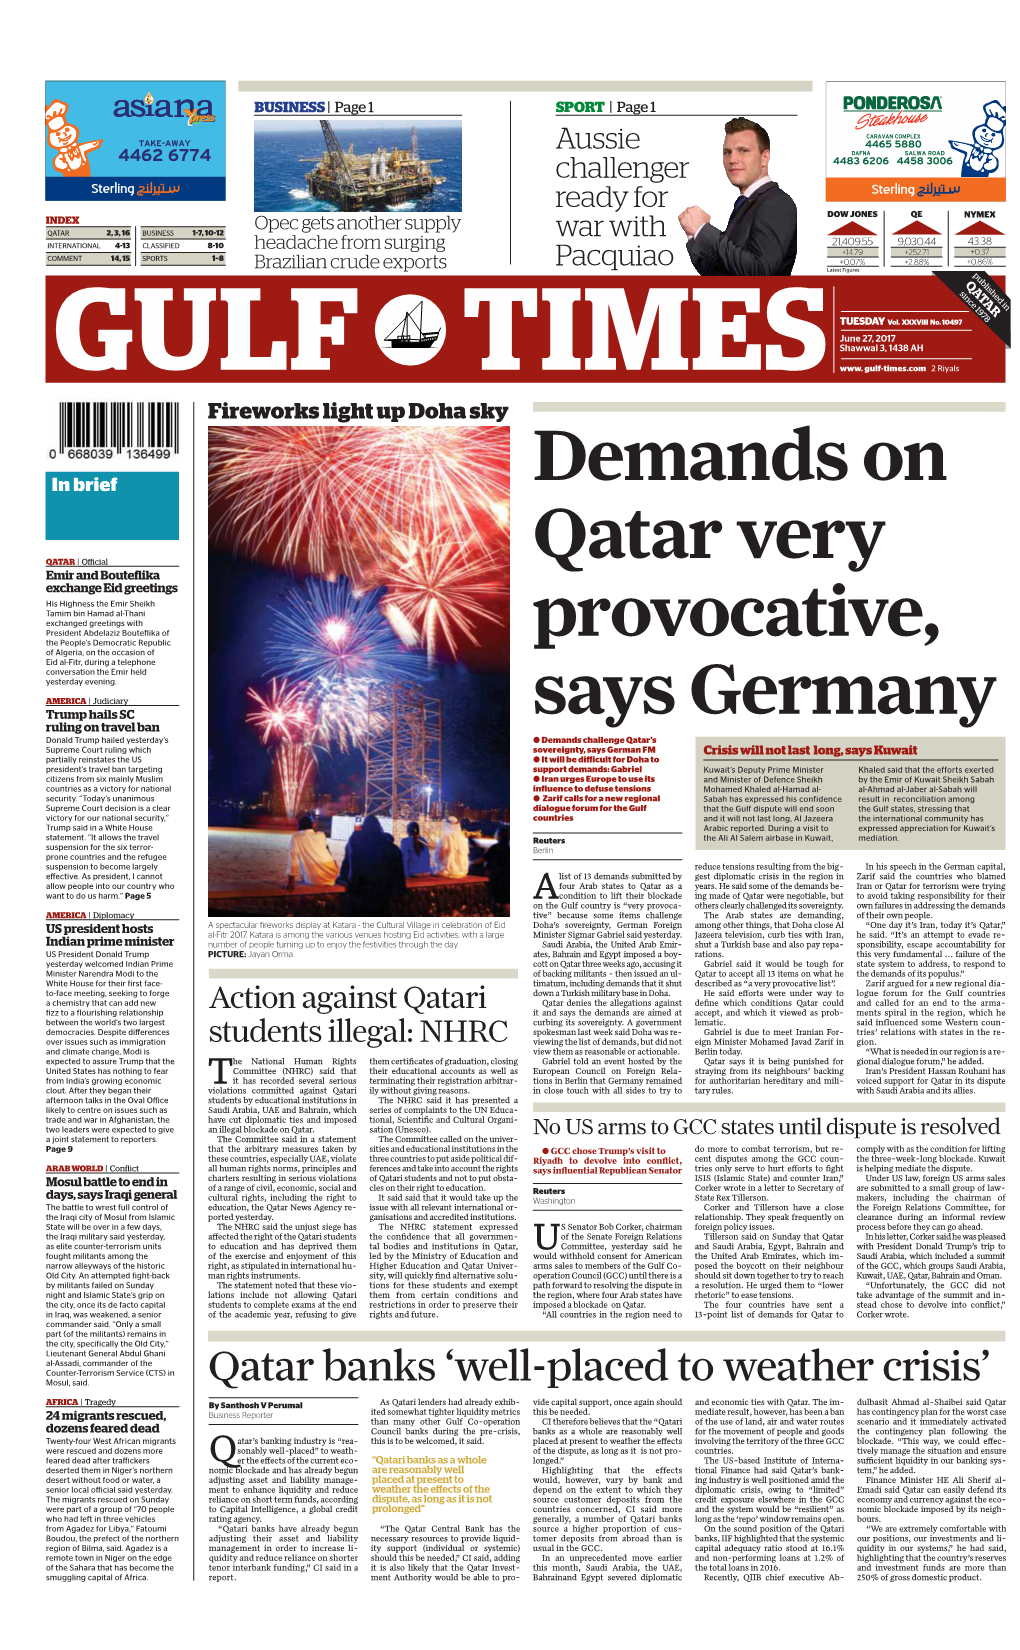 Qatar Banks 'Well-Placed to Weather Crisis'